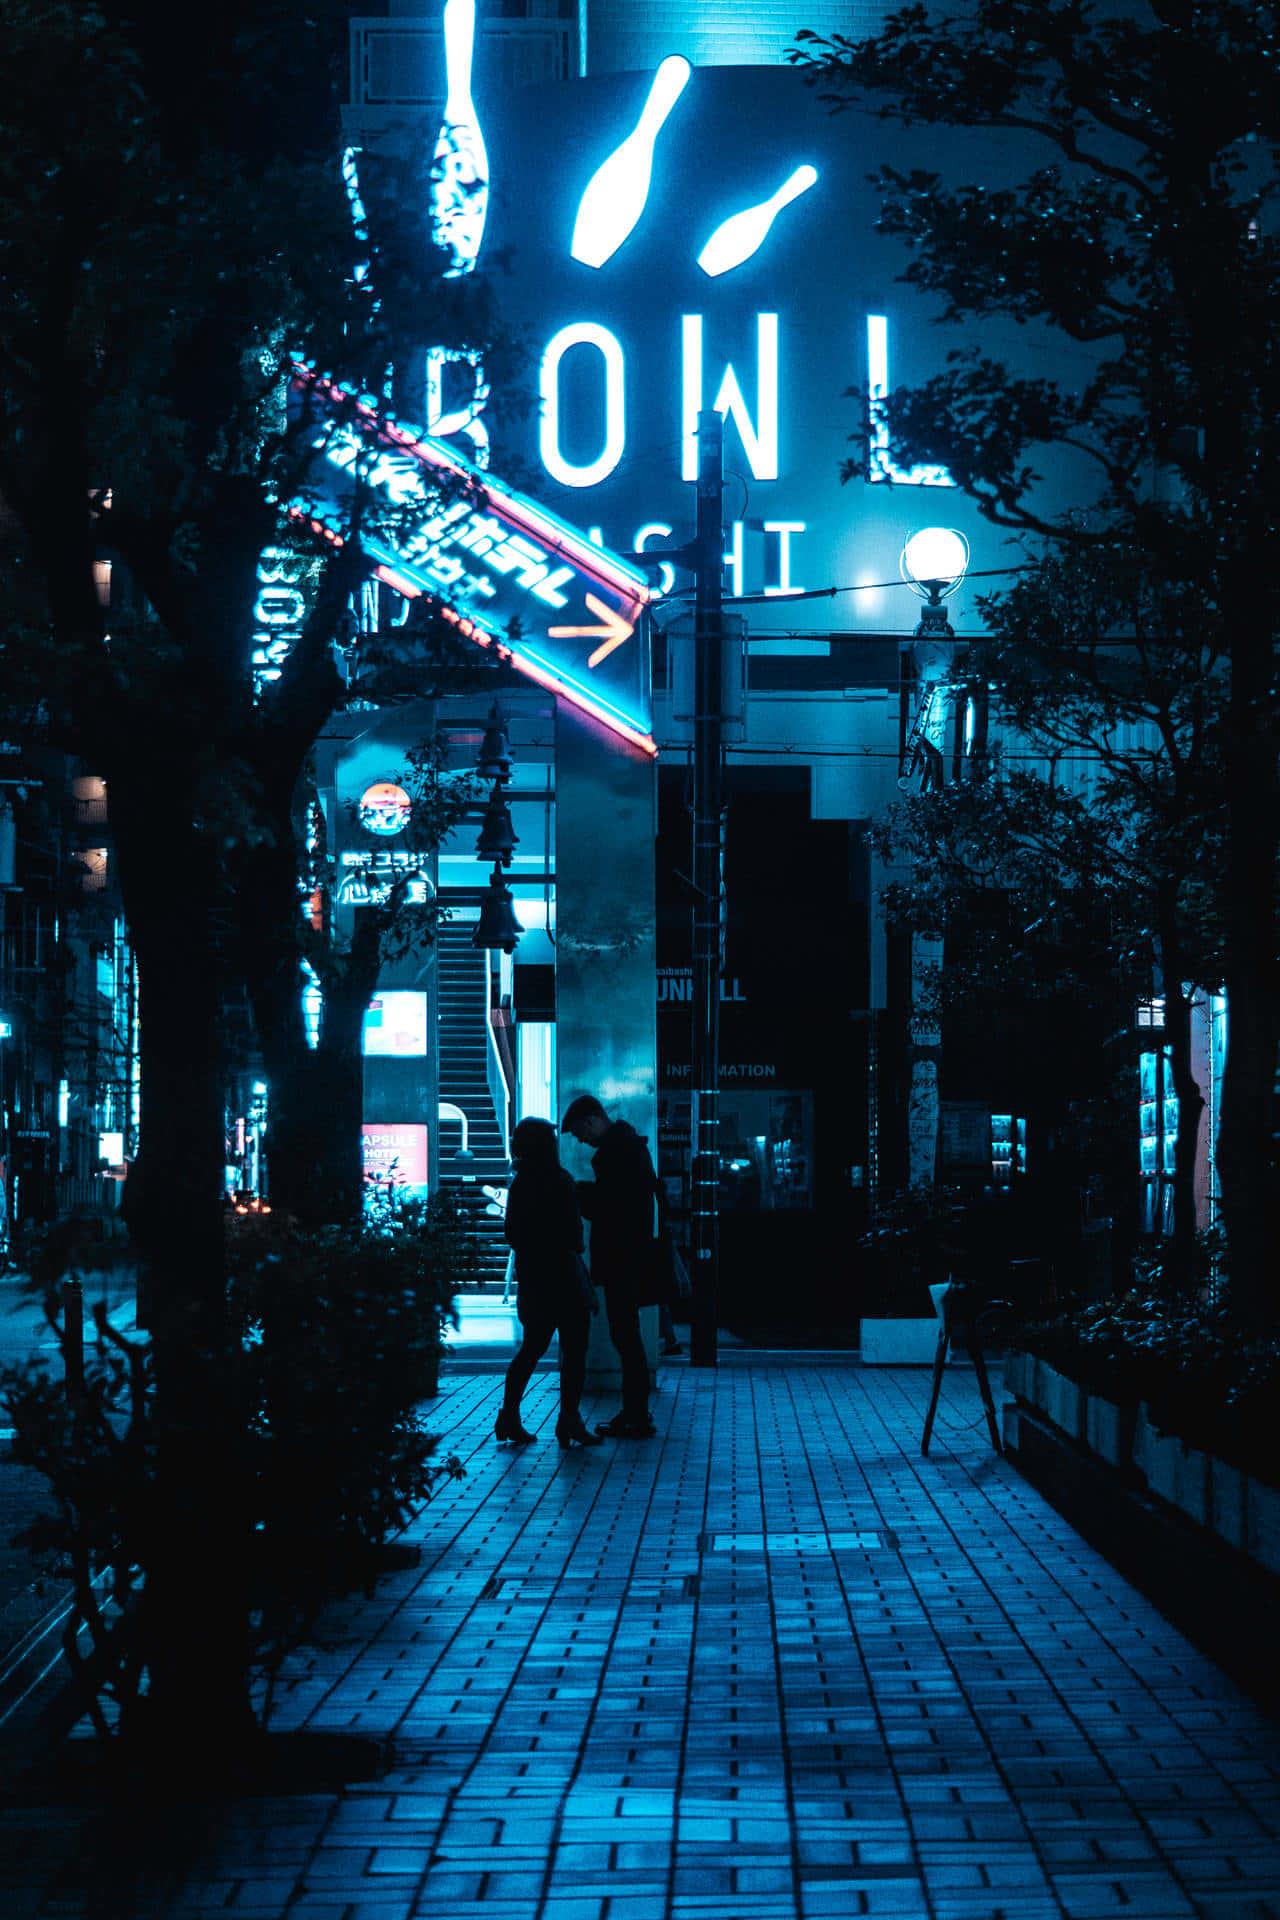 Explore the sights and sounds of the vibrant, illuminated Neon City Aesthetic Wallpaper